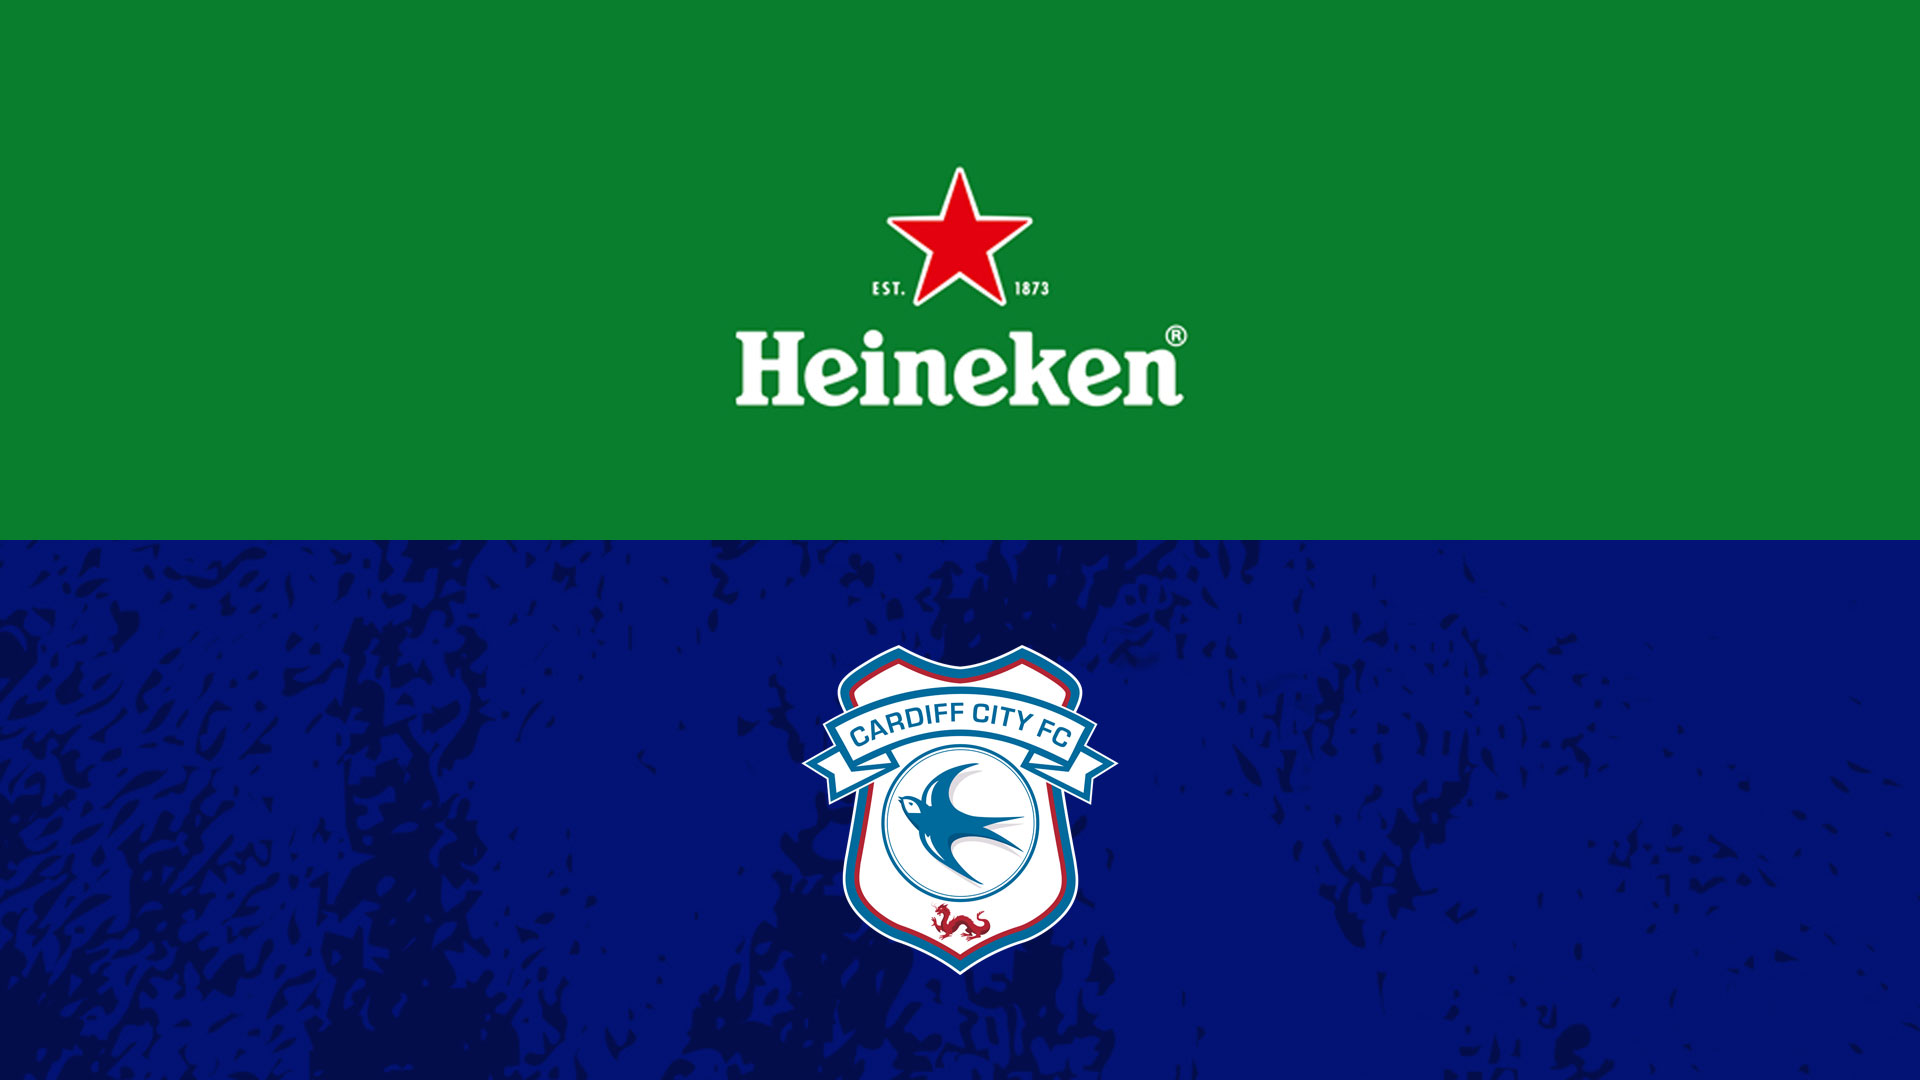 Heineken are our match sponsor for the visit of Coventry City...